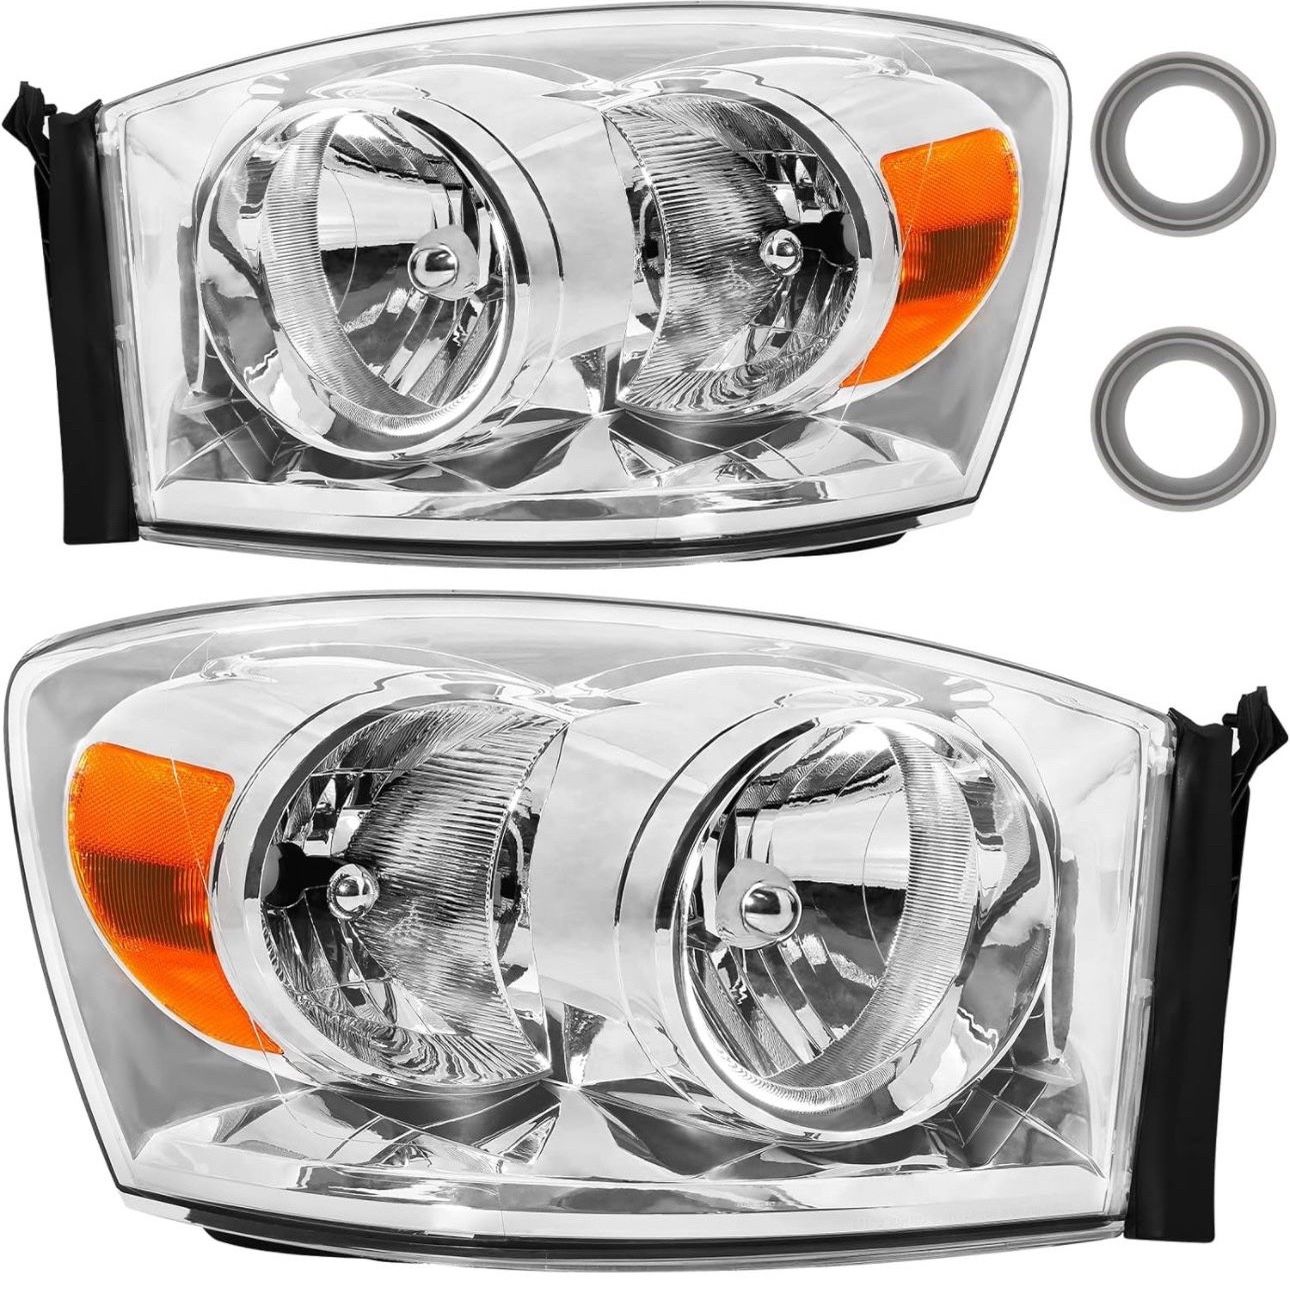 Anti-fogging Headlight Assembly Fit For 06-07-08 Dodge Ram 1500 & 06-07-08-09 2500 & 3500